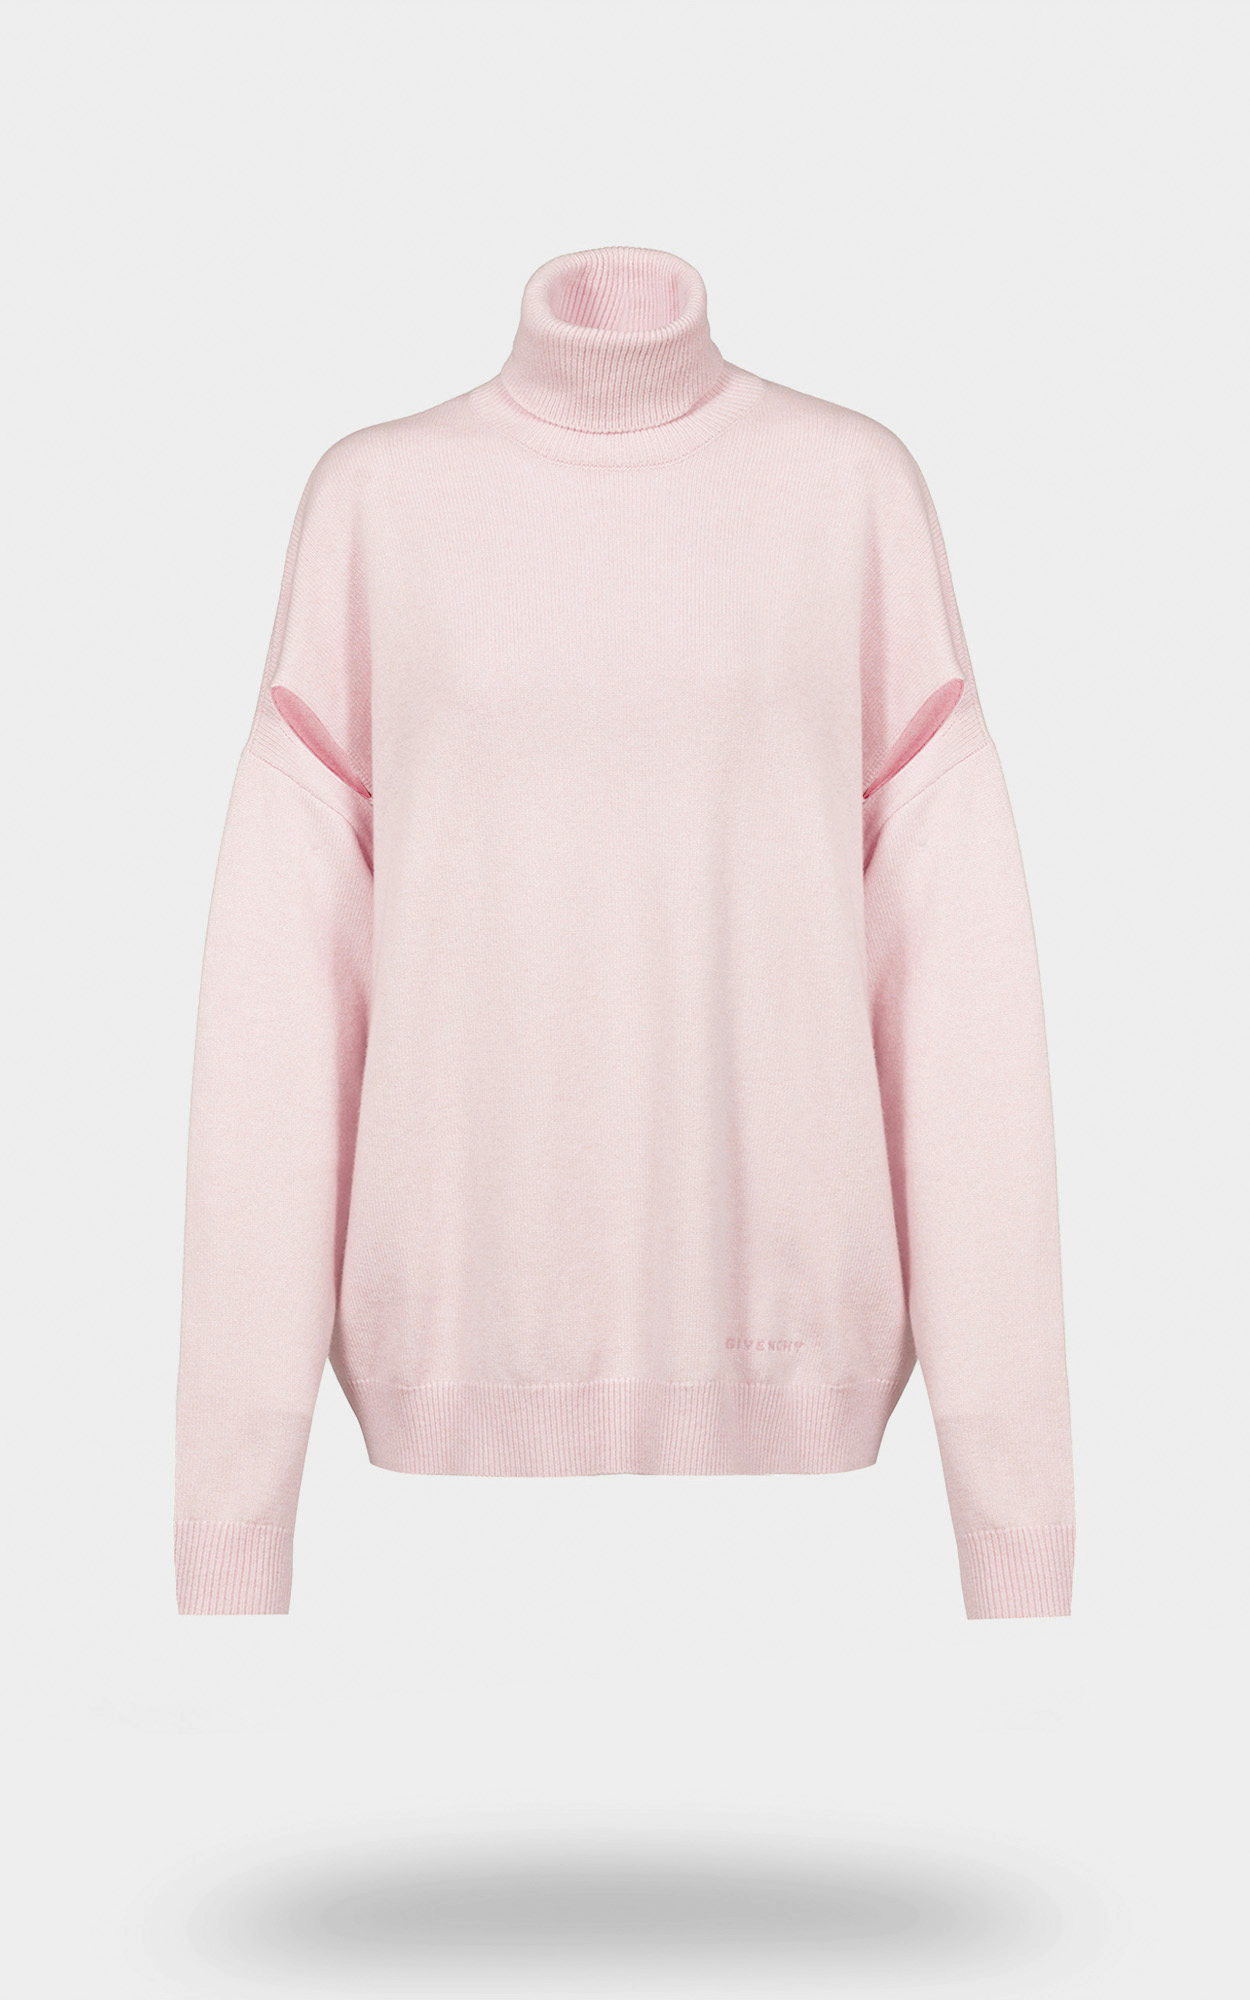 Givenchy - Kaschmir-Pullover in Rosa